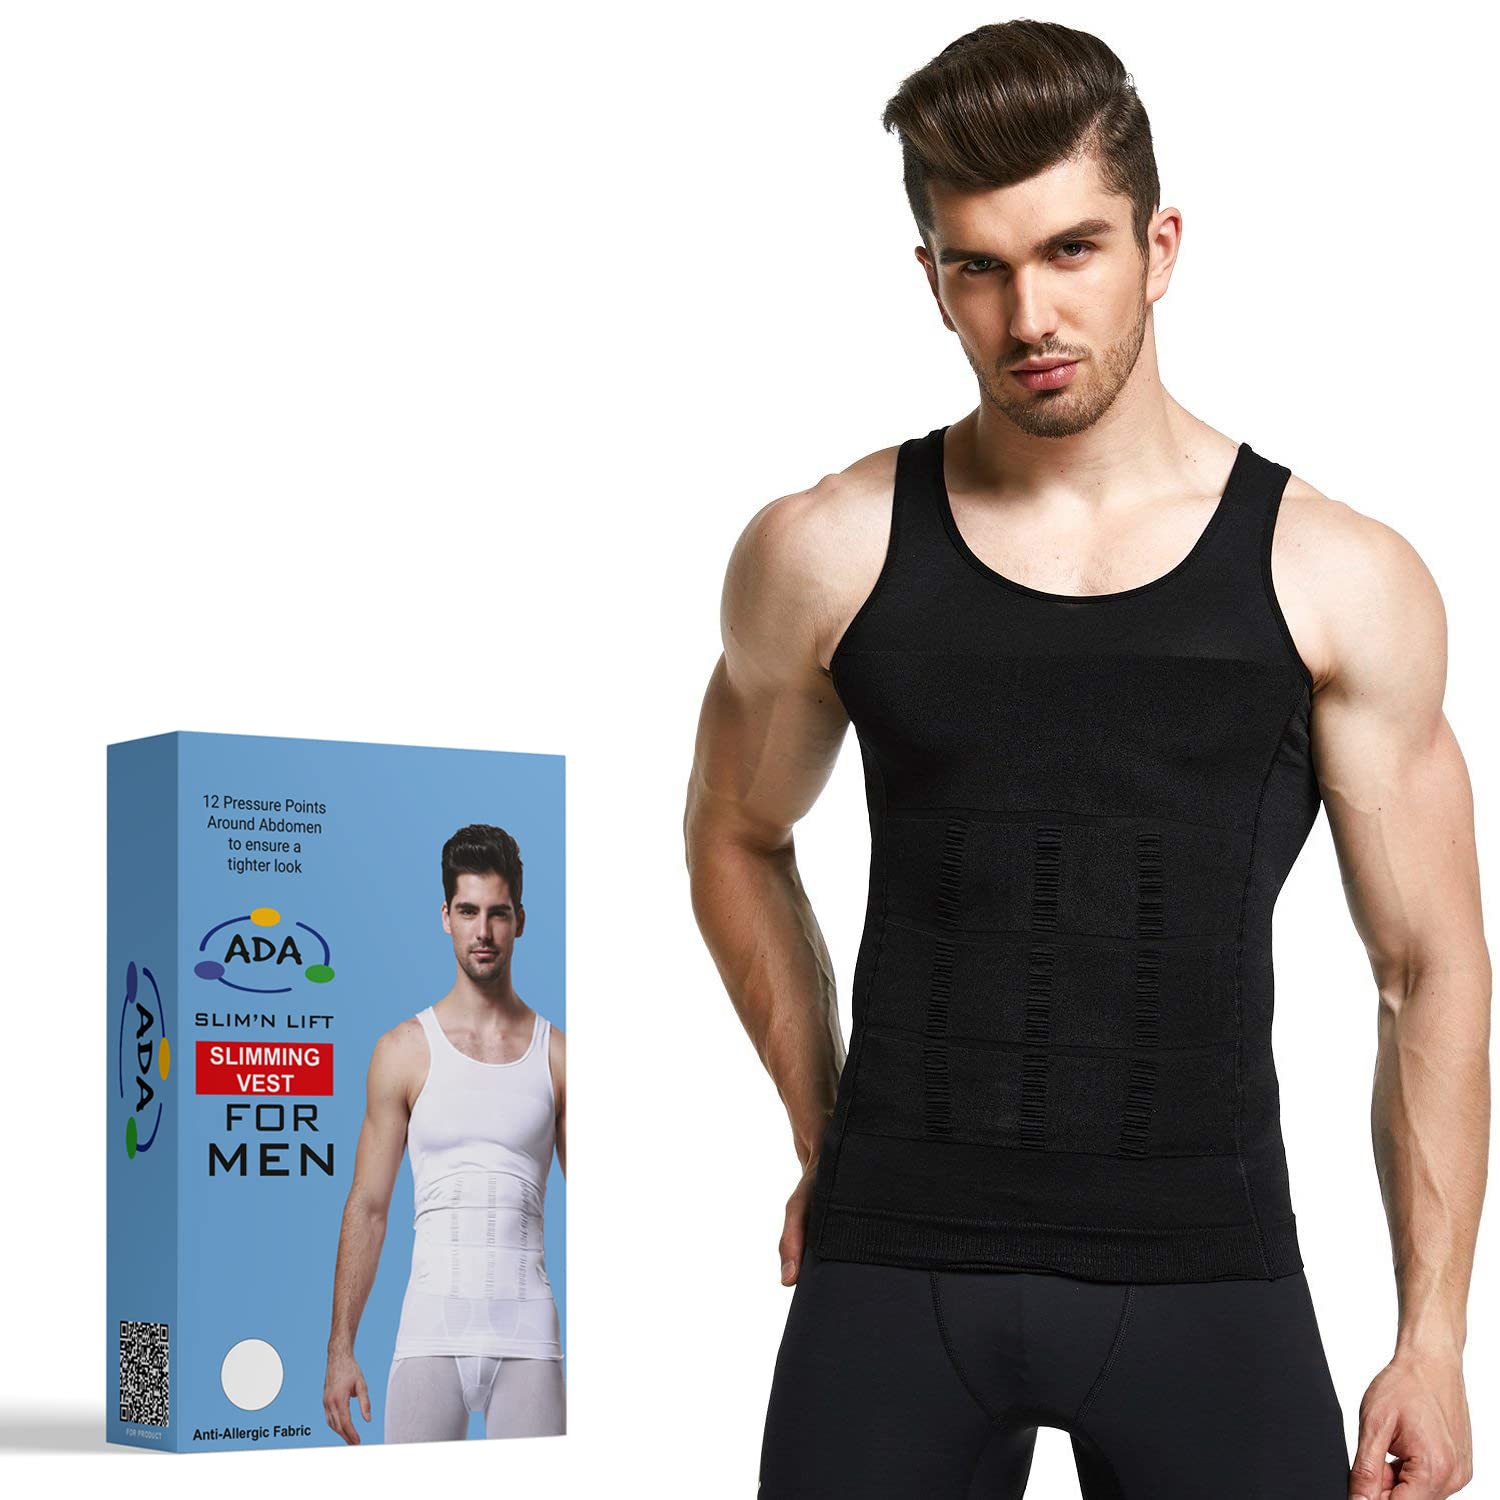  Insta Slim Mens Compression Tank Top - Slimming Body Shaper  Muscle Tank, Abdomen Control Undershirt For Home, Workouts, Gym, Running,  Special Occasions & Daily Wear